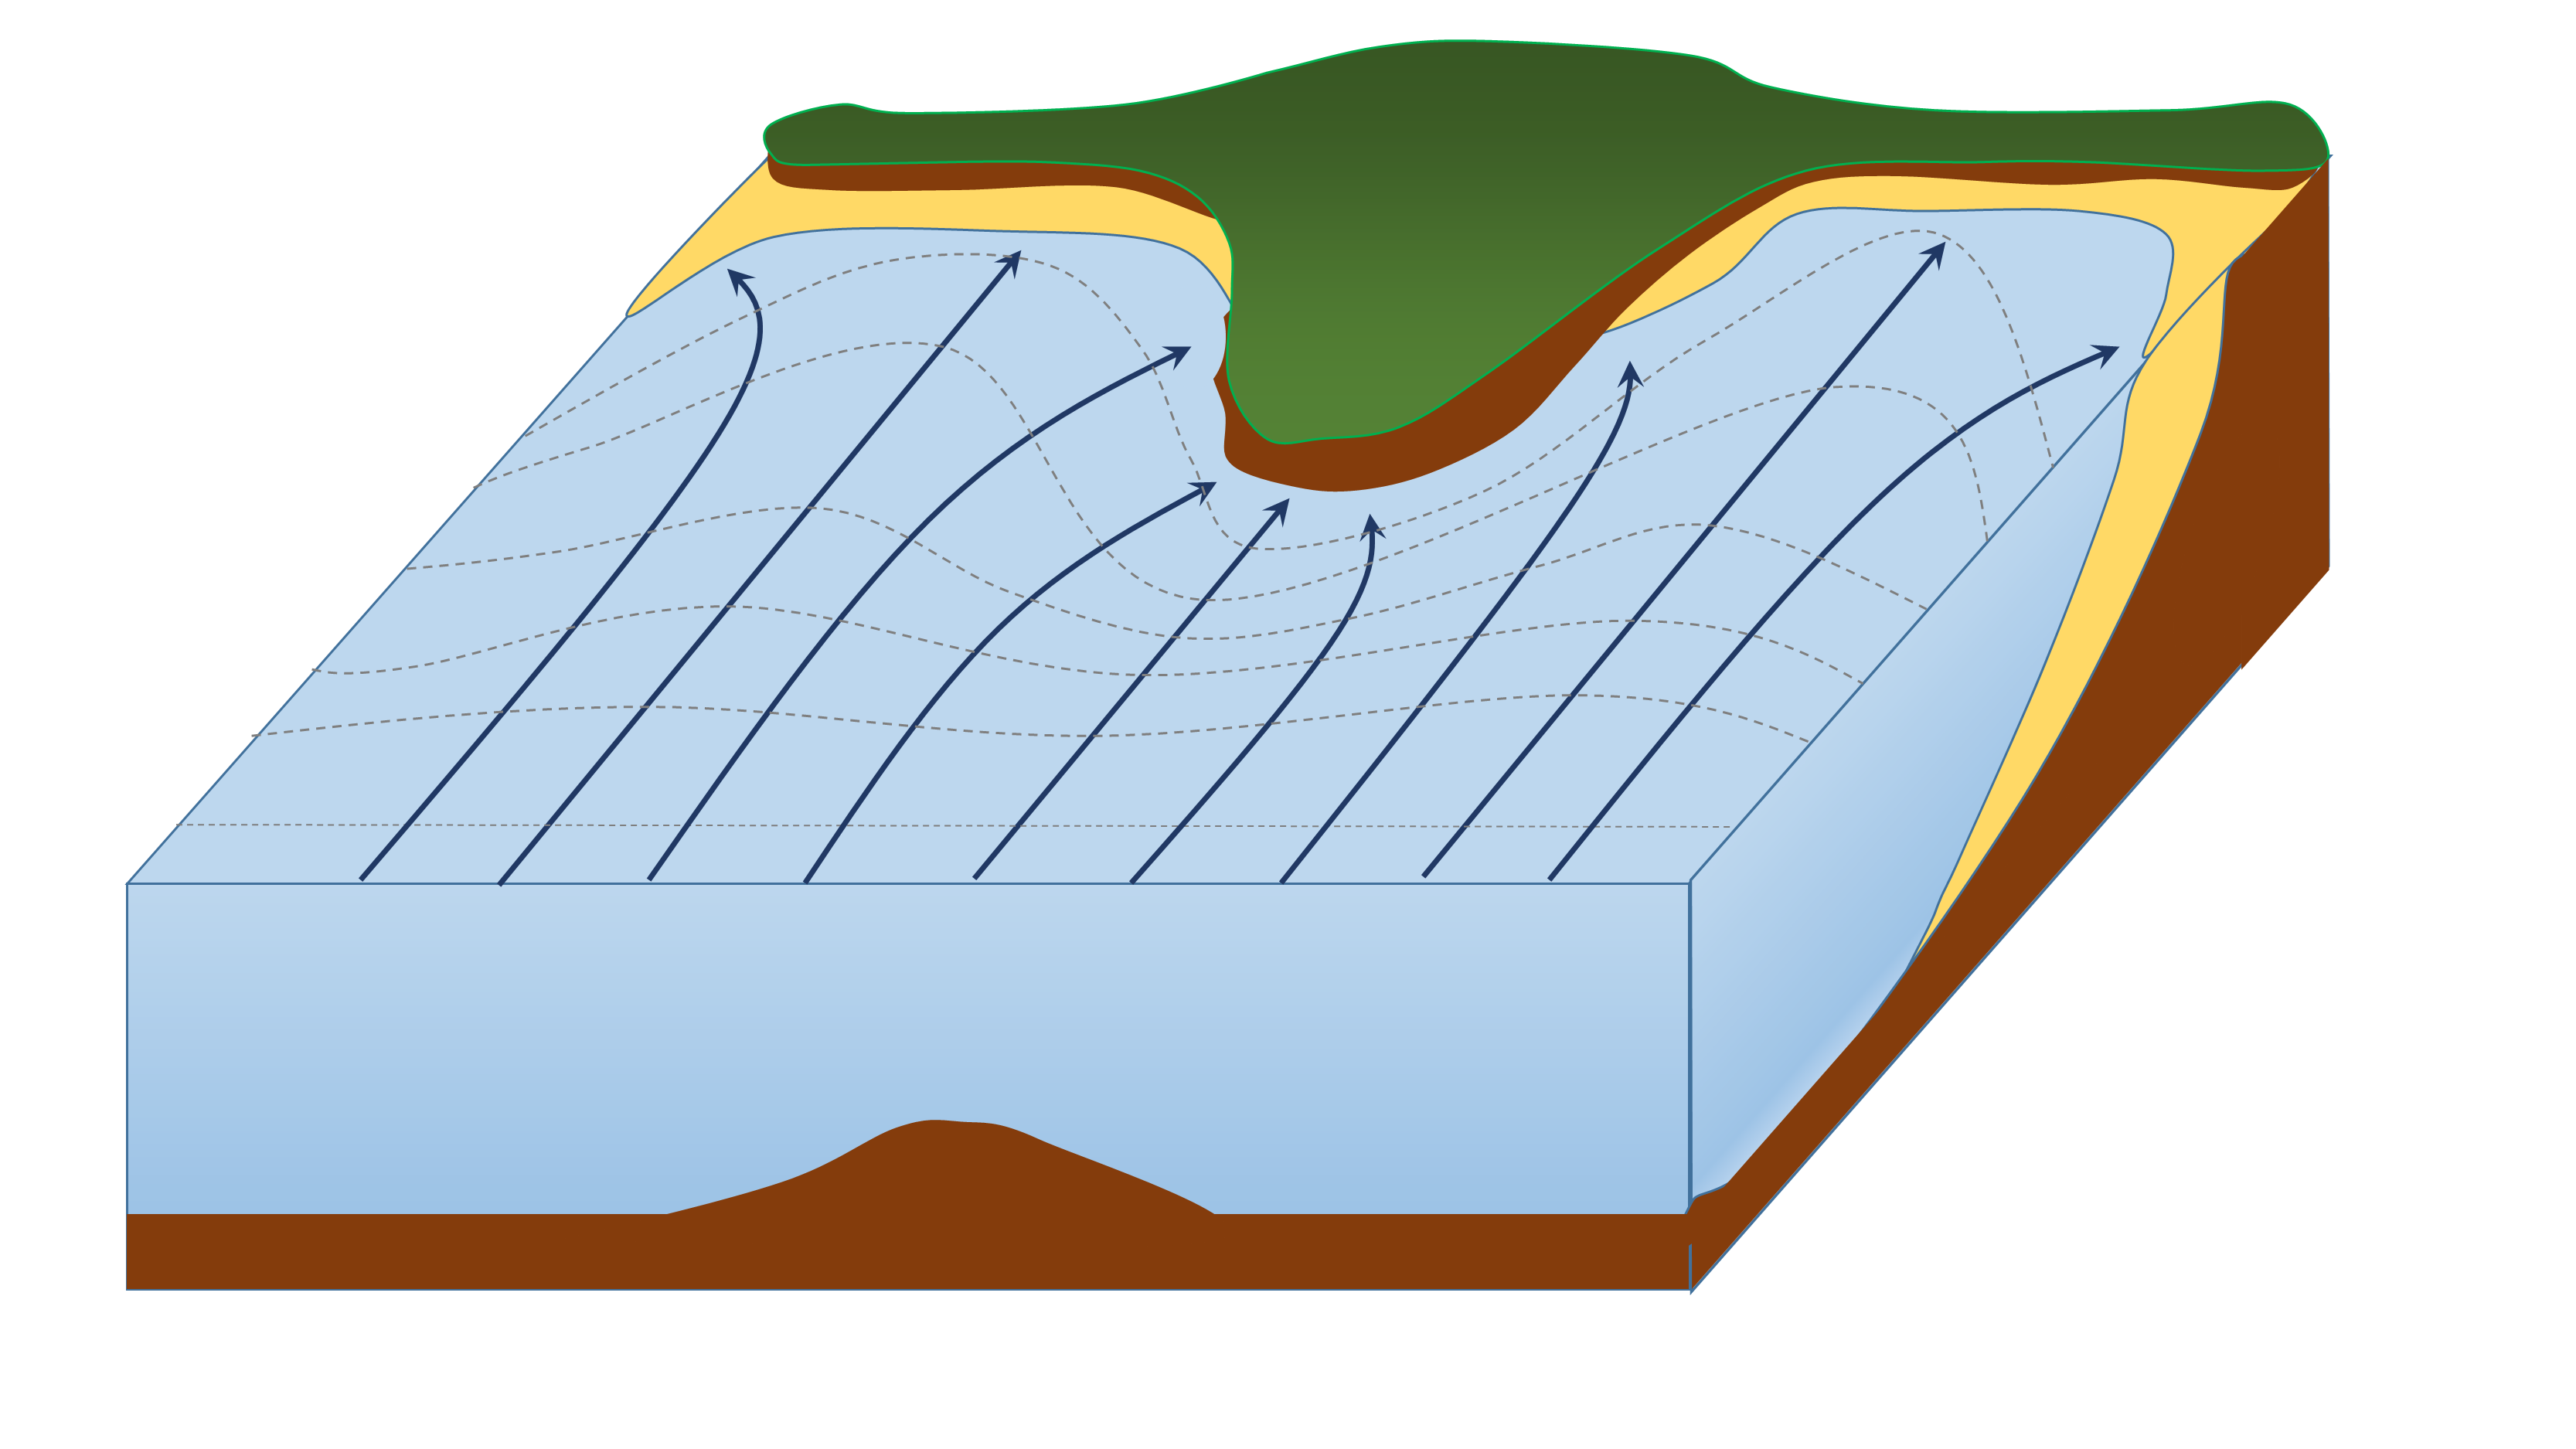 refraction of waves diagram